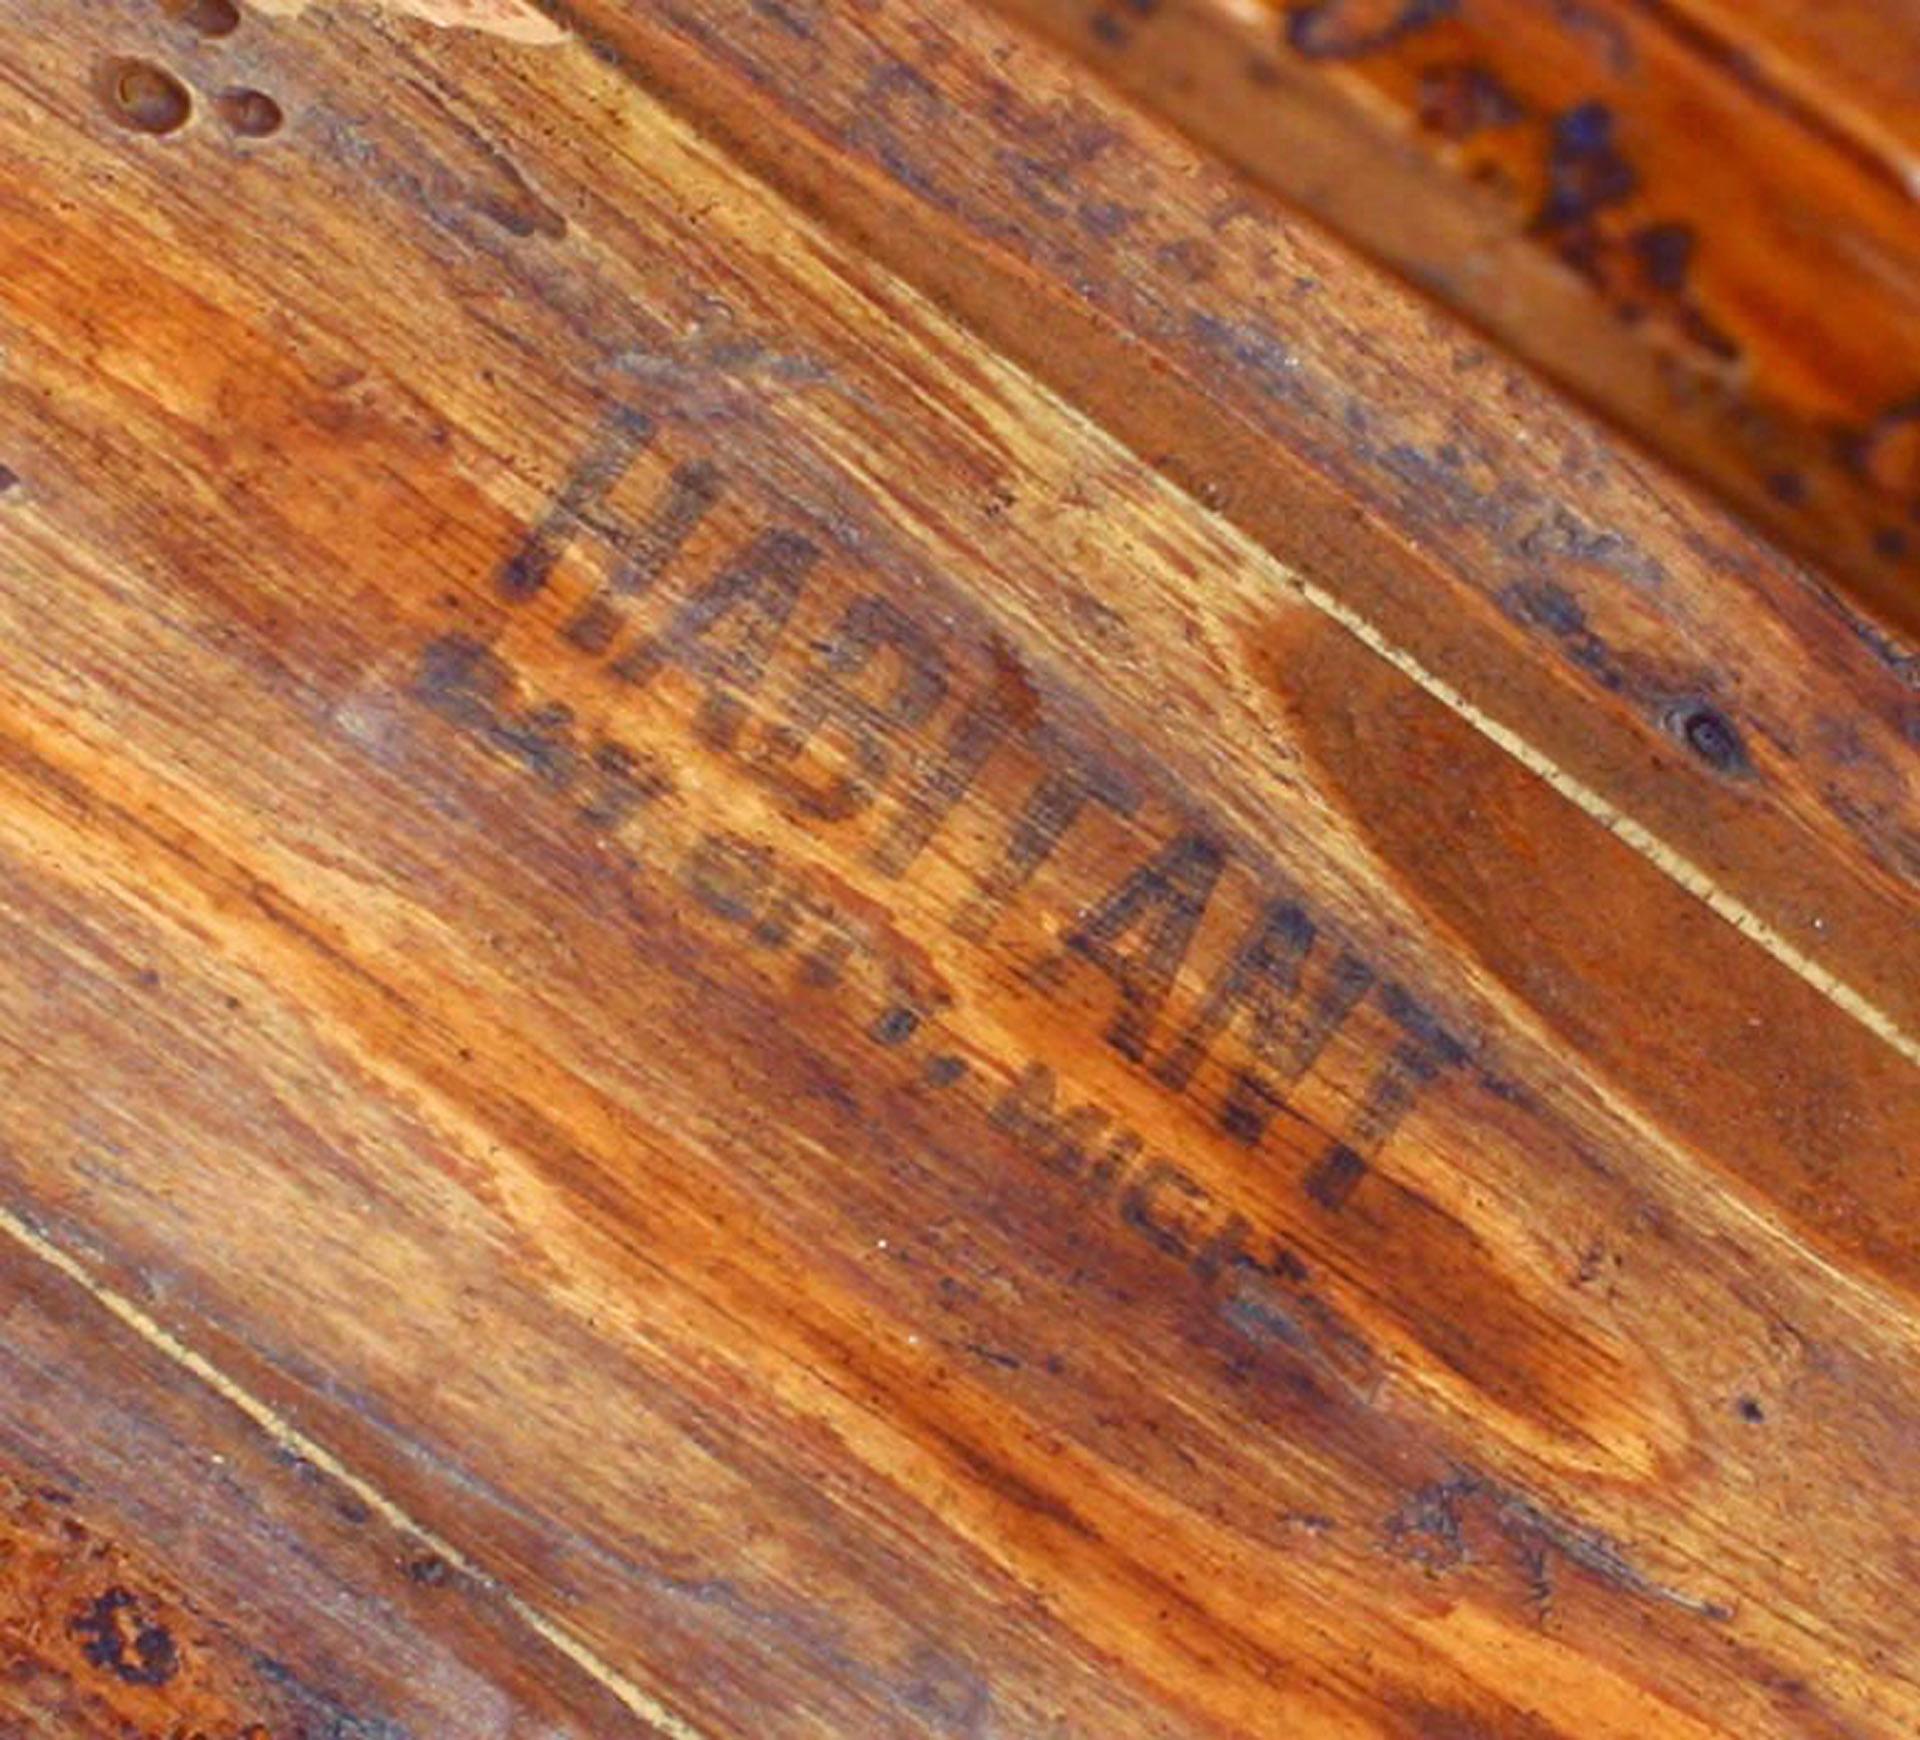 Rustic 1940's Three-Sided Hickory Bench by Habitant Furniture Co.